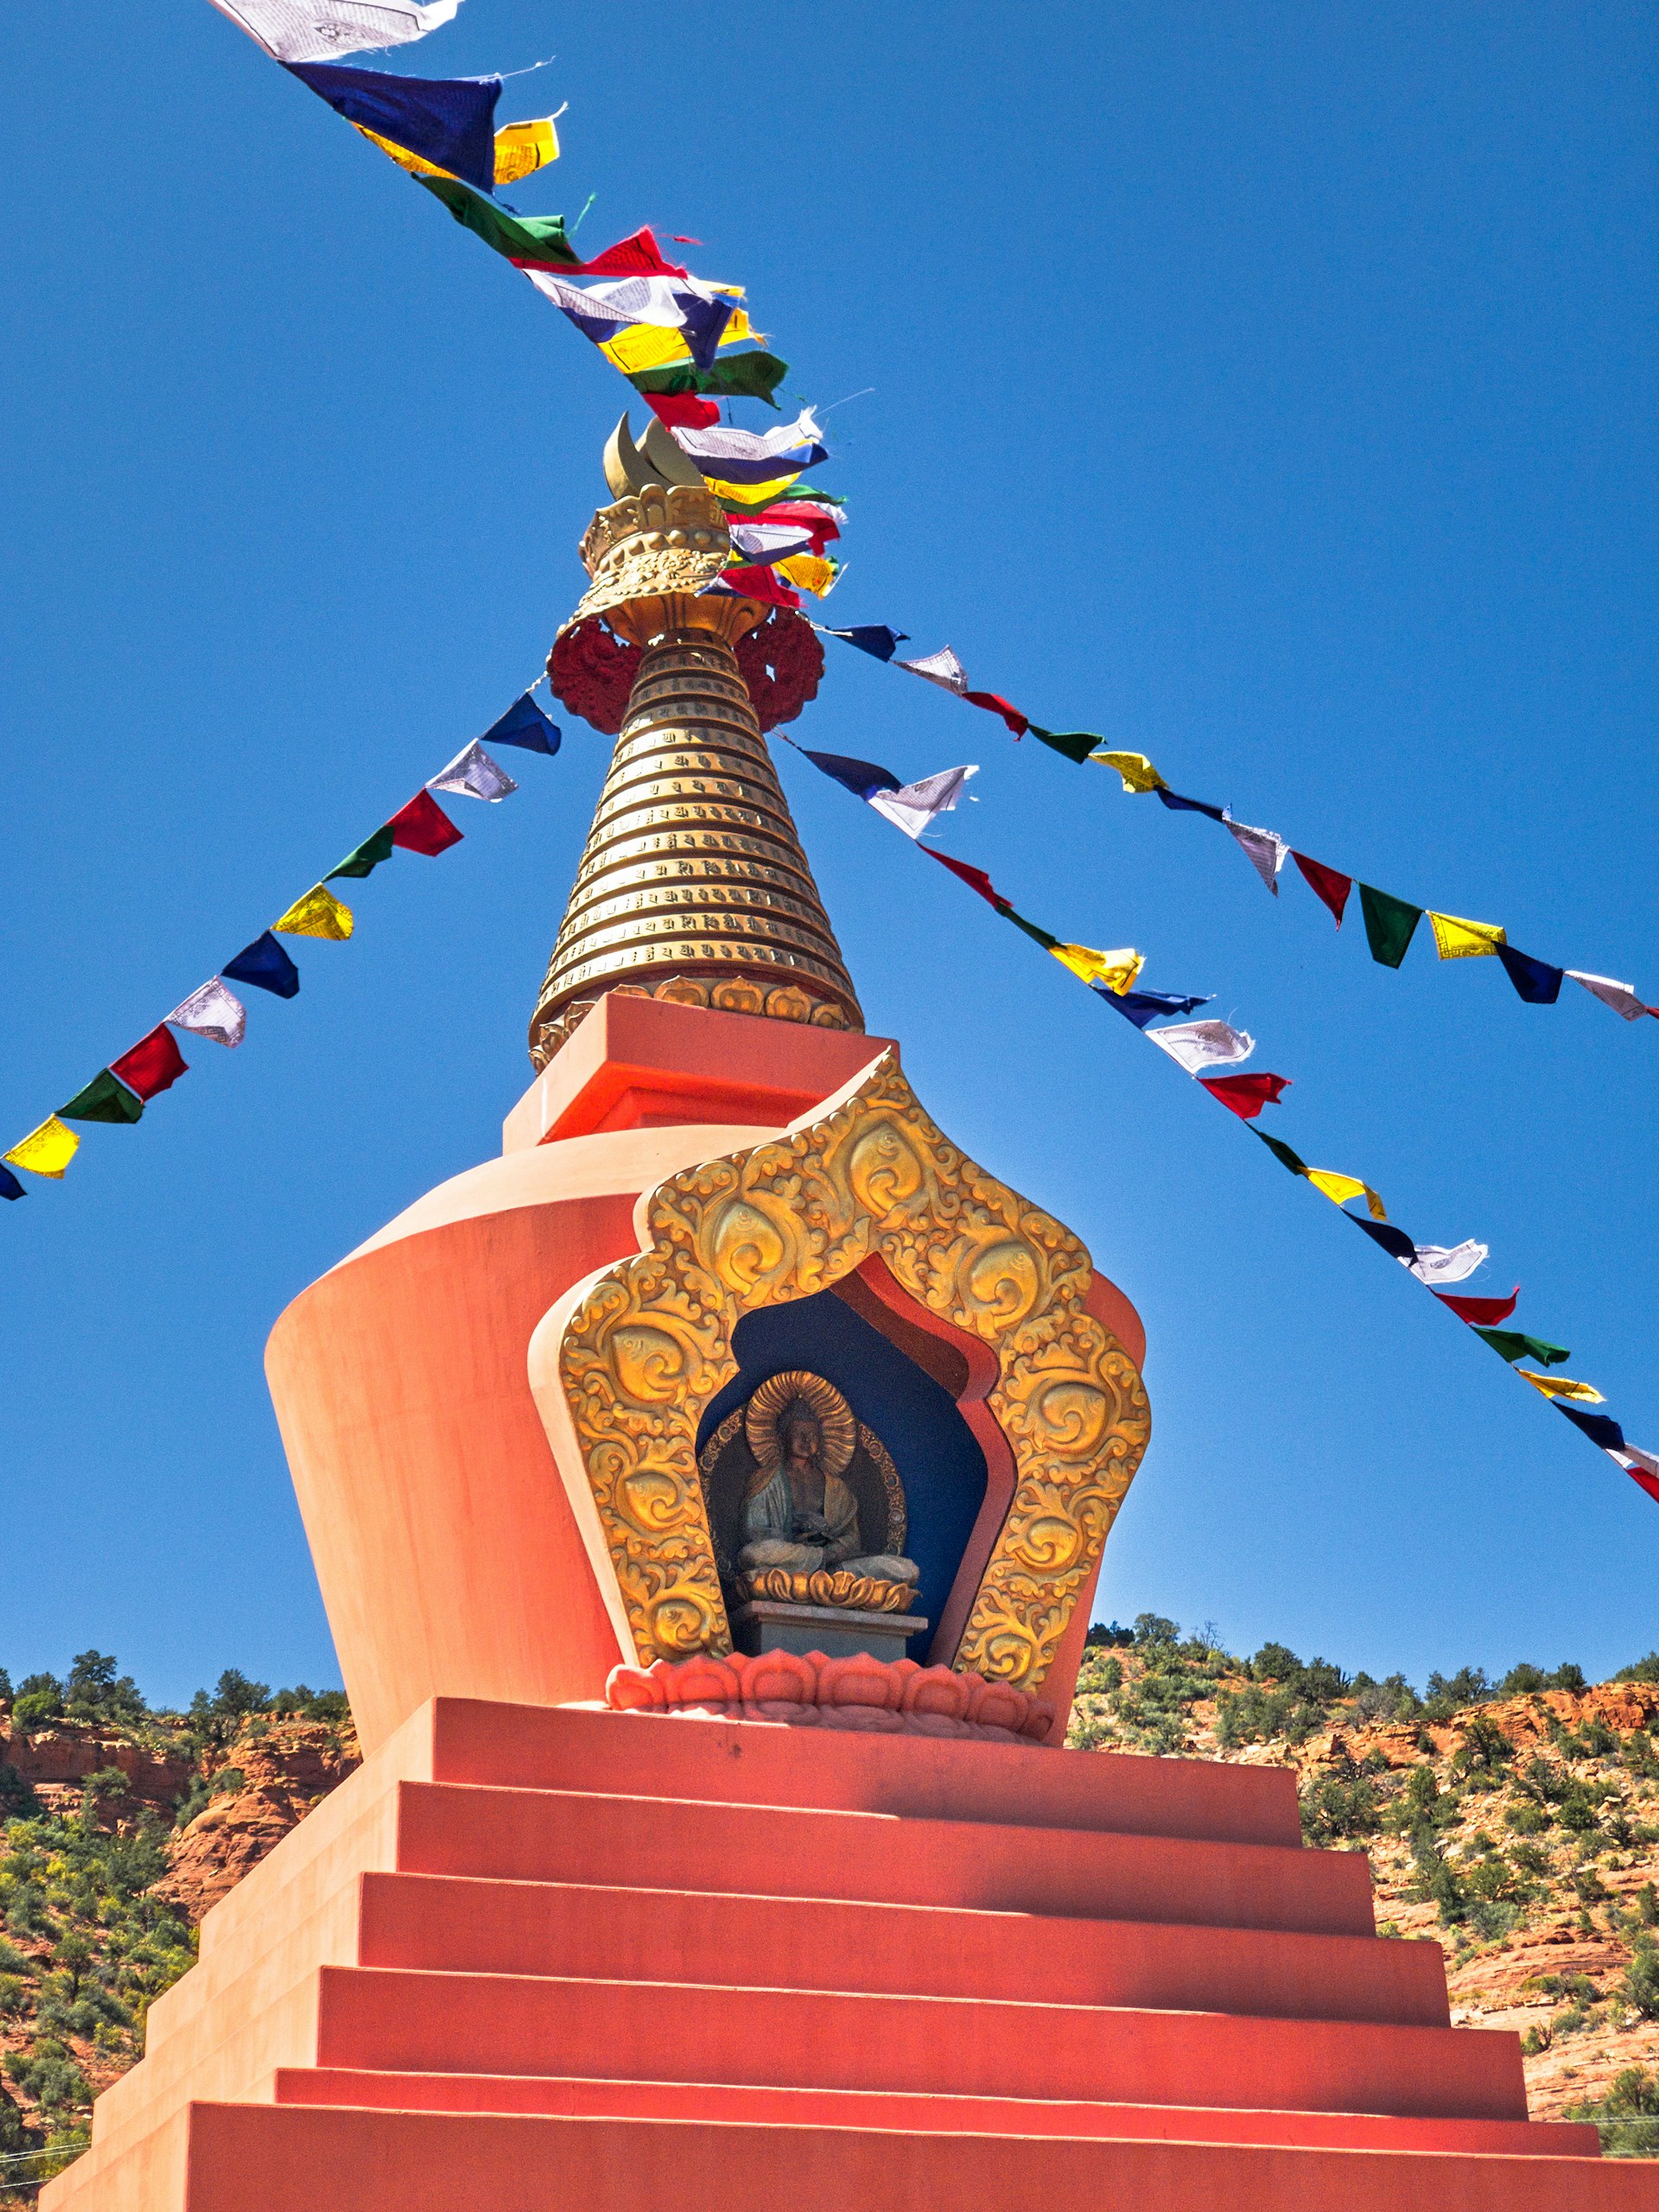 A terracotta-colored Buddhist stupa set against a clear blue sky, with colorful prayer flags strung from the top.